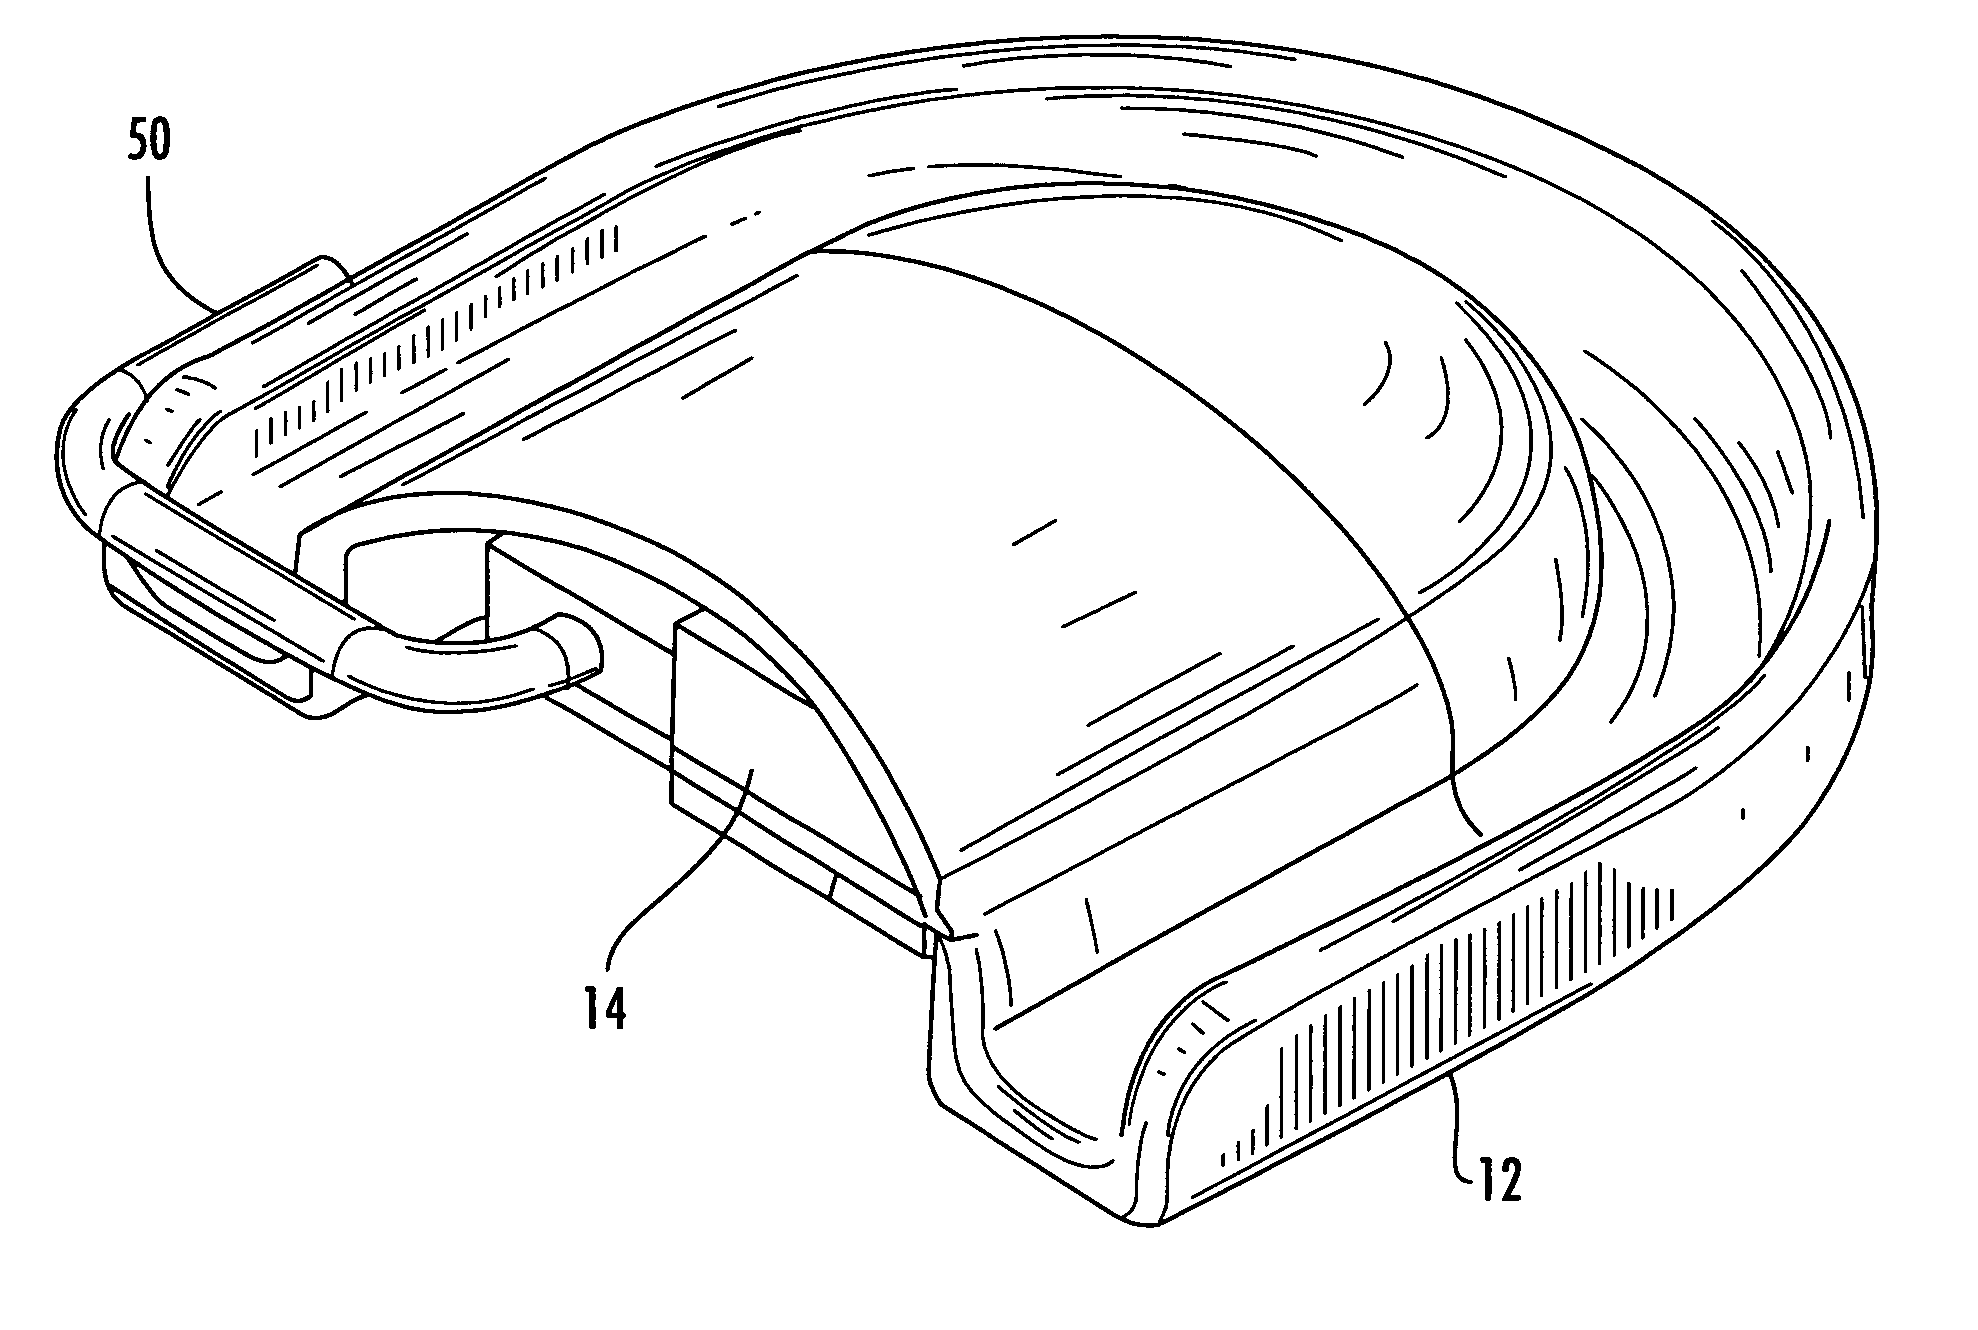 Mouth-operated computer input device and associated methods